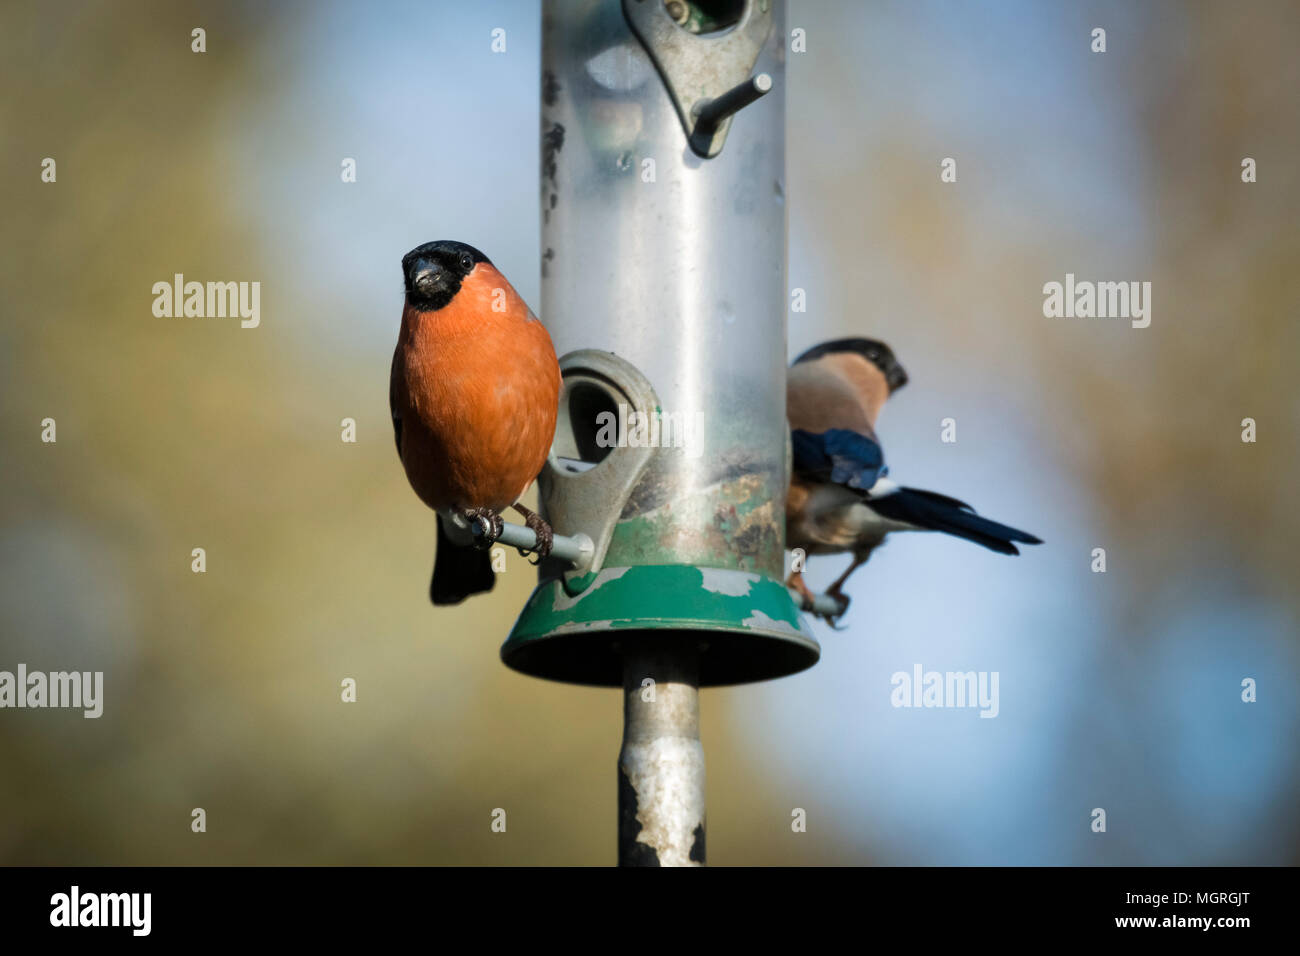 Two adult bullfinches (male & female pair) with different & distinctive plumage, perched either side of garden bird feeder - West Yorkshire, England. Stock Photo